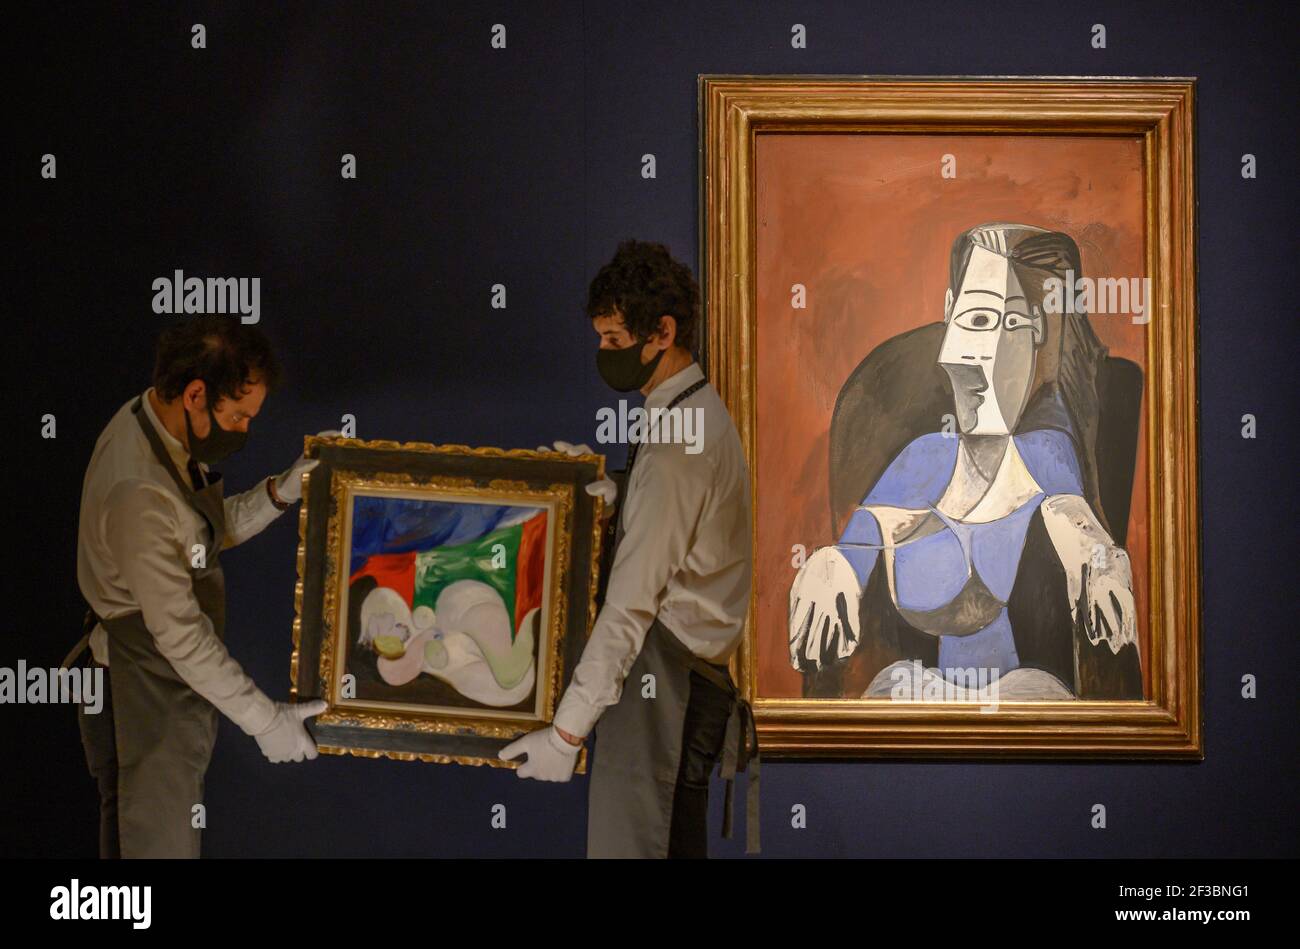 Christies, London, UK. 16 March 2021. Preparations behind closed doors for the livestreamed 20th Century Art evening sale and The Art of the Surreal sale 23 March. The sale is led by Pablo Picasso’s Femme nue couchée au collier (Marie-Therese), (1932), estimate of £9,000,000-£15,000,000, seen in front of Pablo Picasso, Femme assise dans un fauteuil noir (Jacqueline), (1962), estimate of £6,000,000-£9,000,000. Credit: Malcolm Park/Alamy Live News. Stock Photo